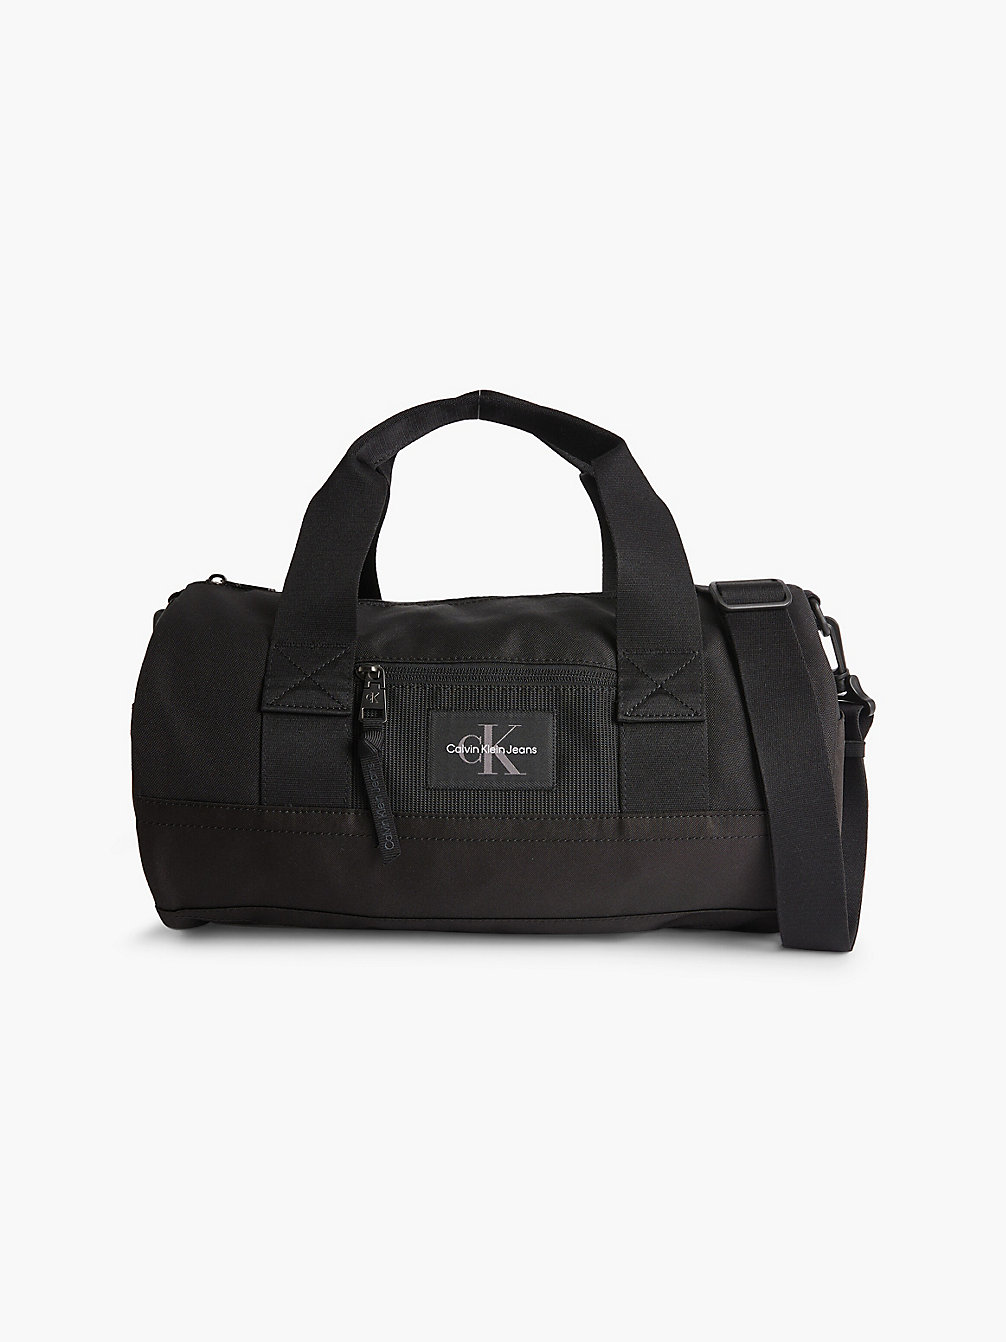 BLACK Recycled Duffle Bag undefined men Calvin Klein